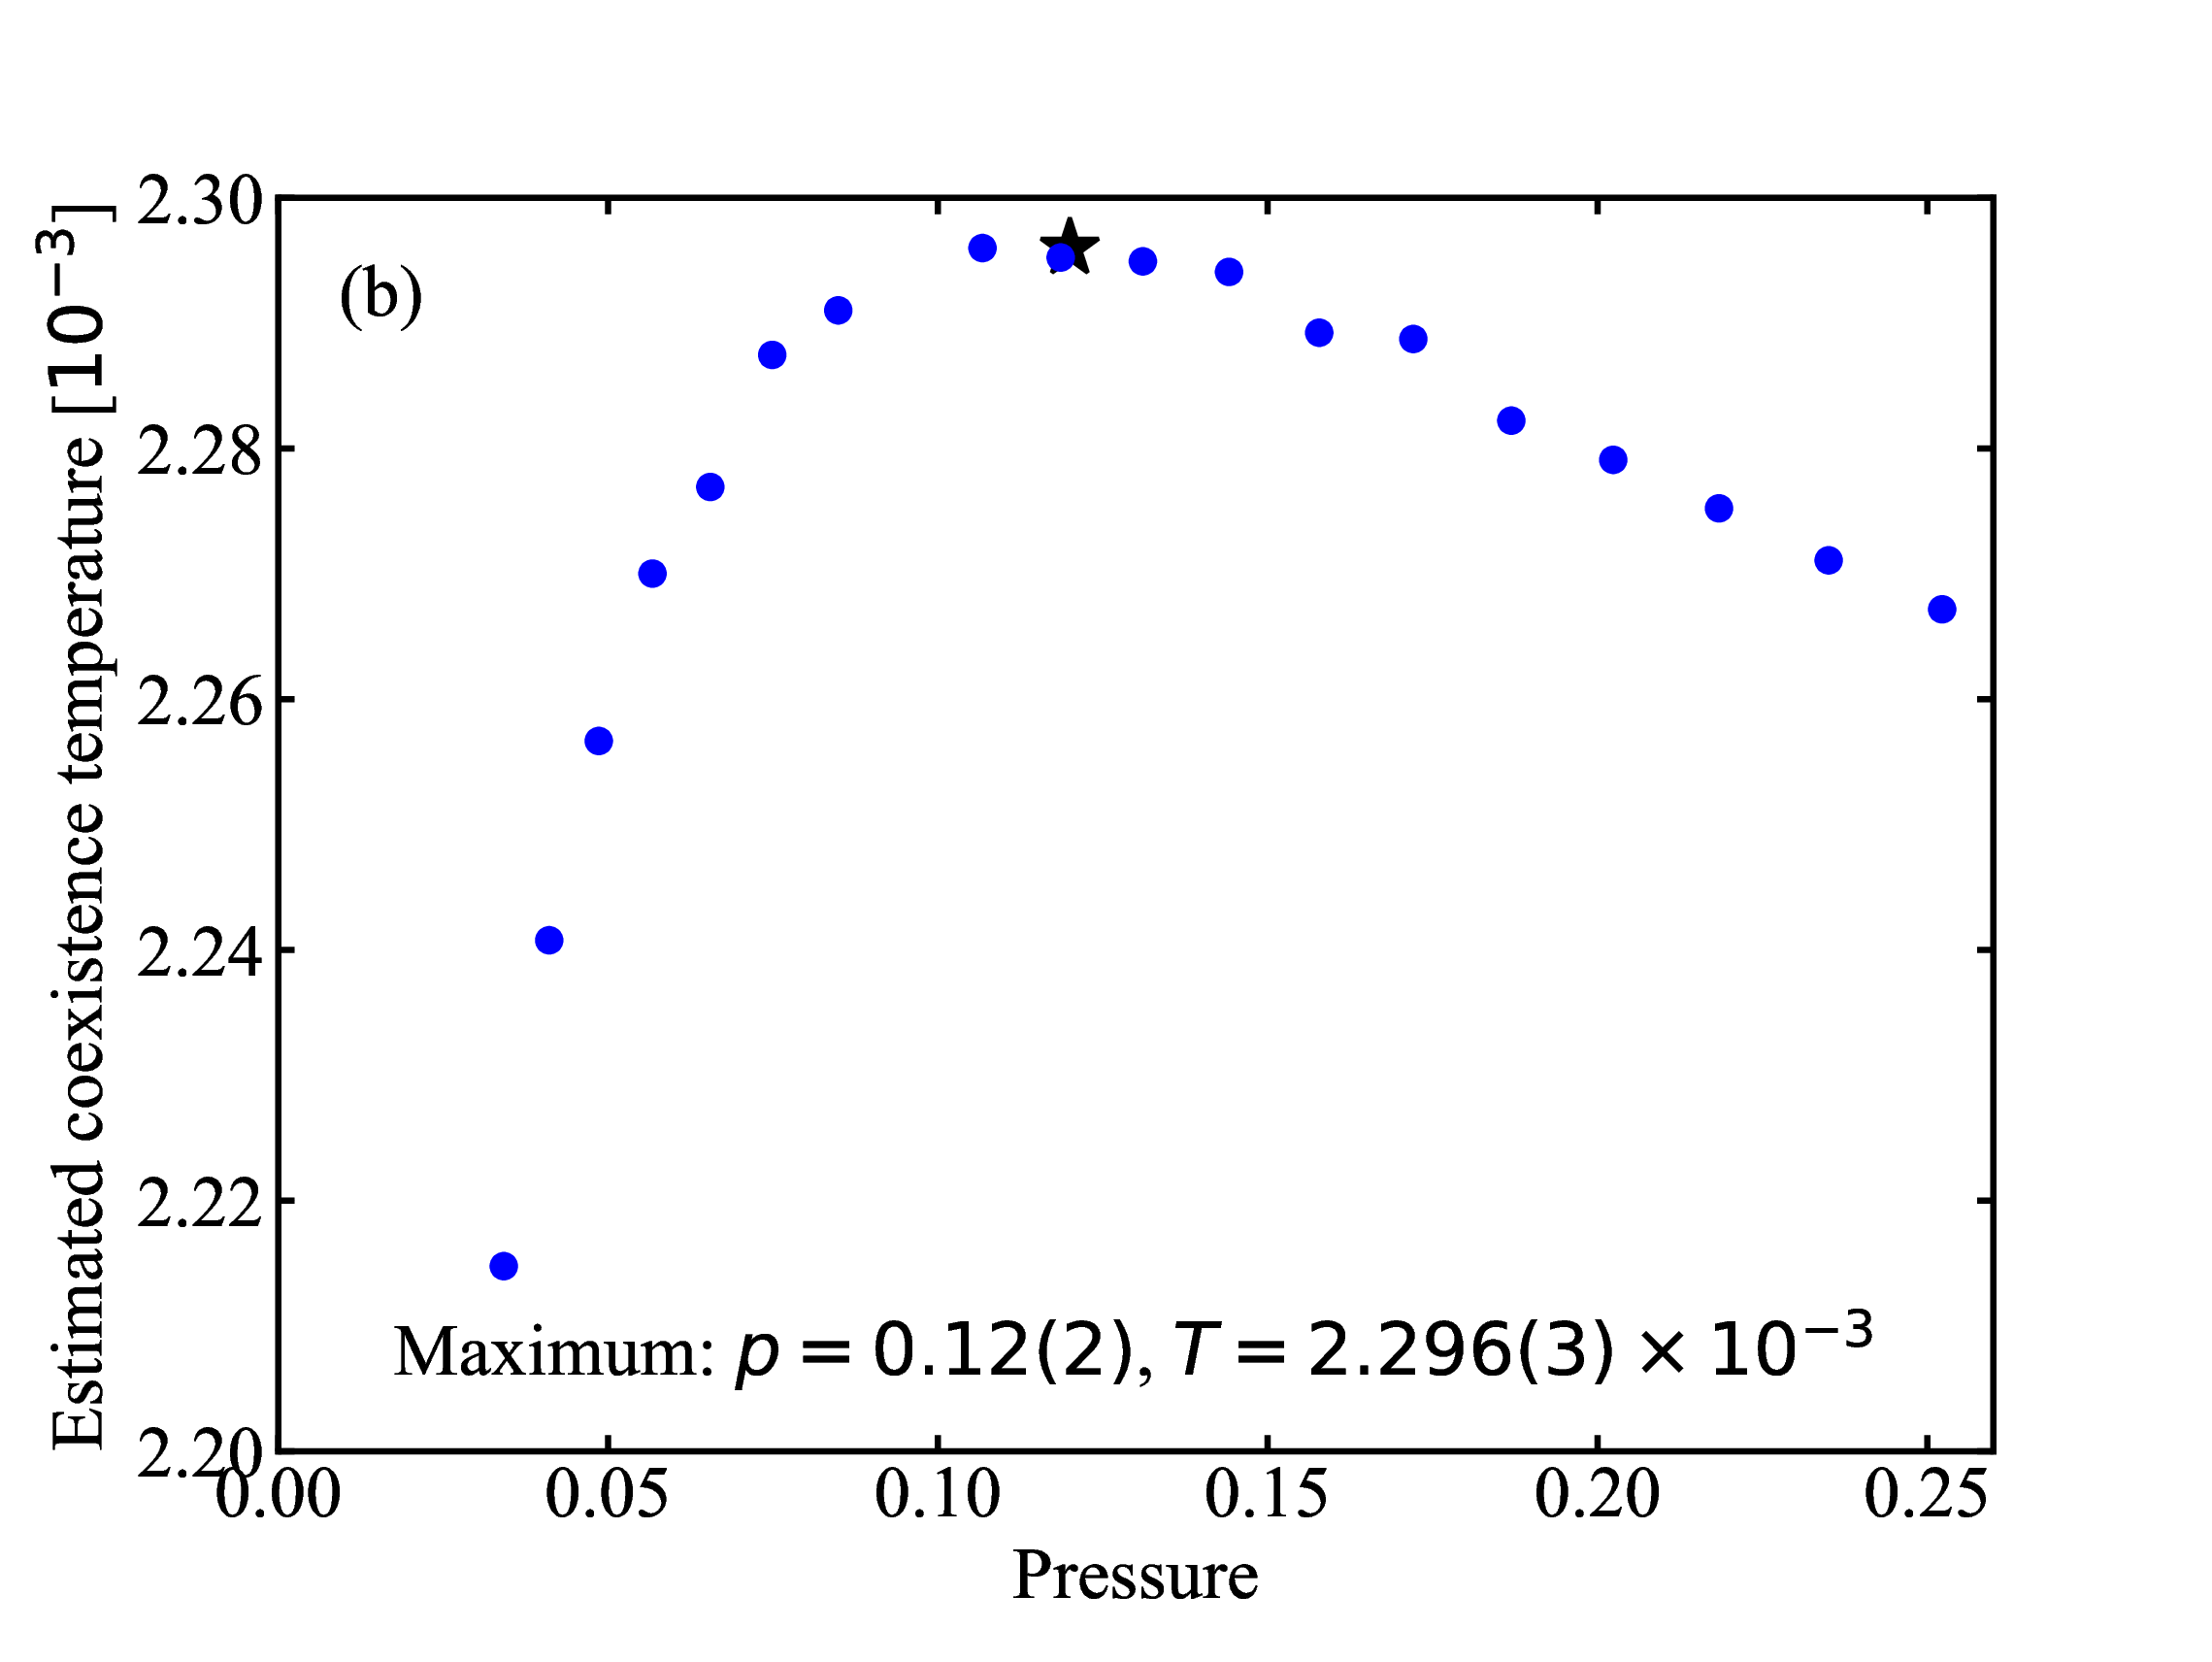 JCP_150_174501_2019_data/fig/fig8b.png